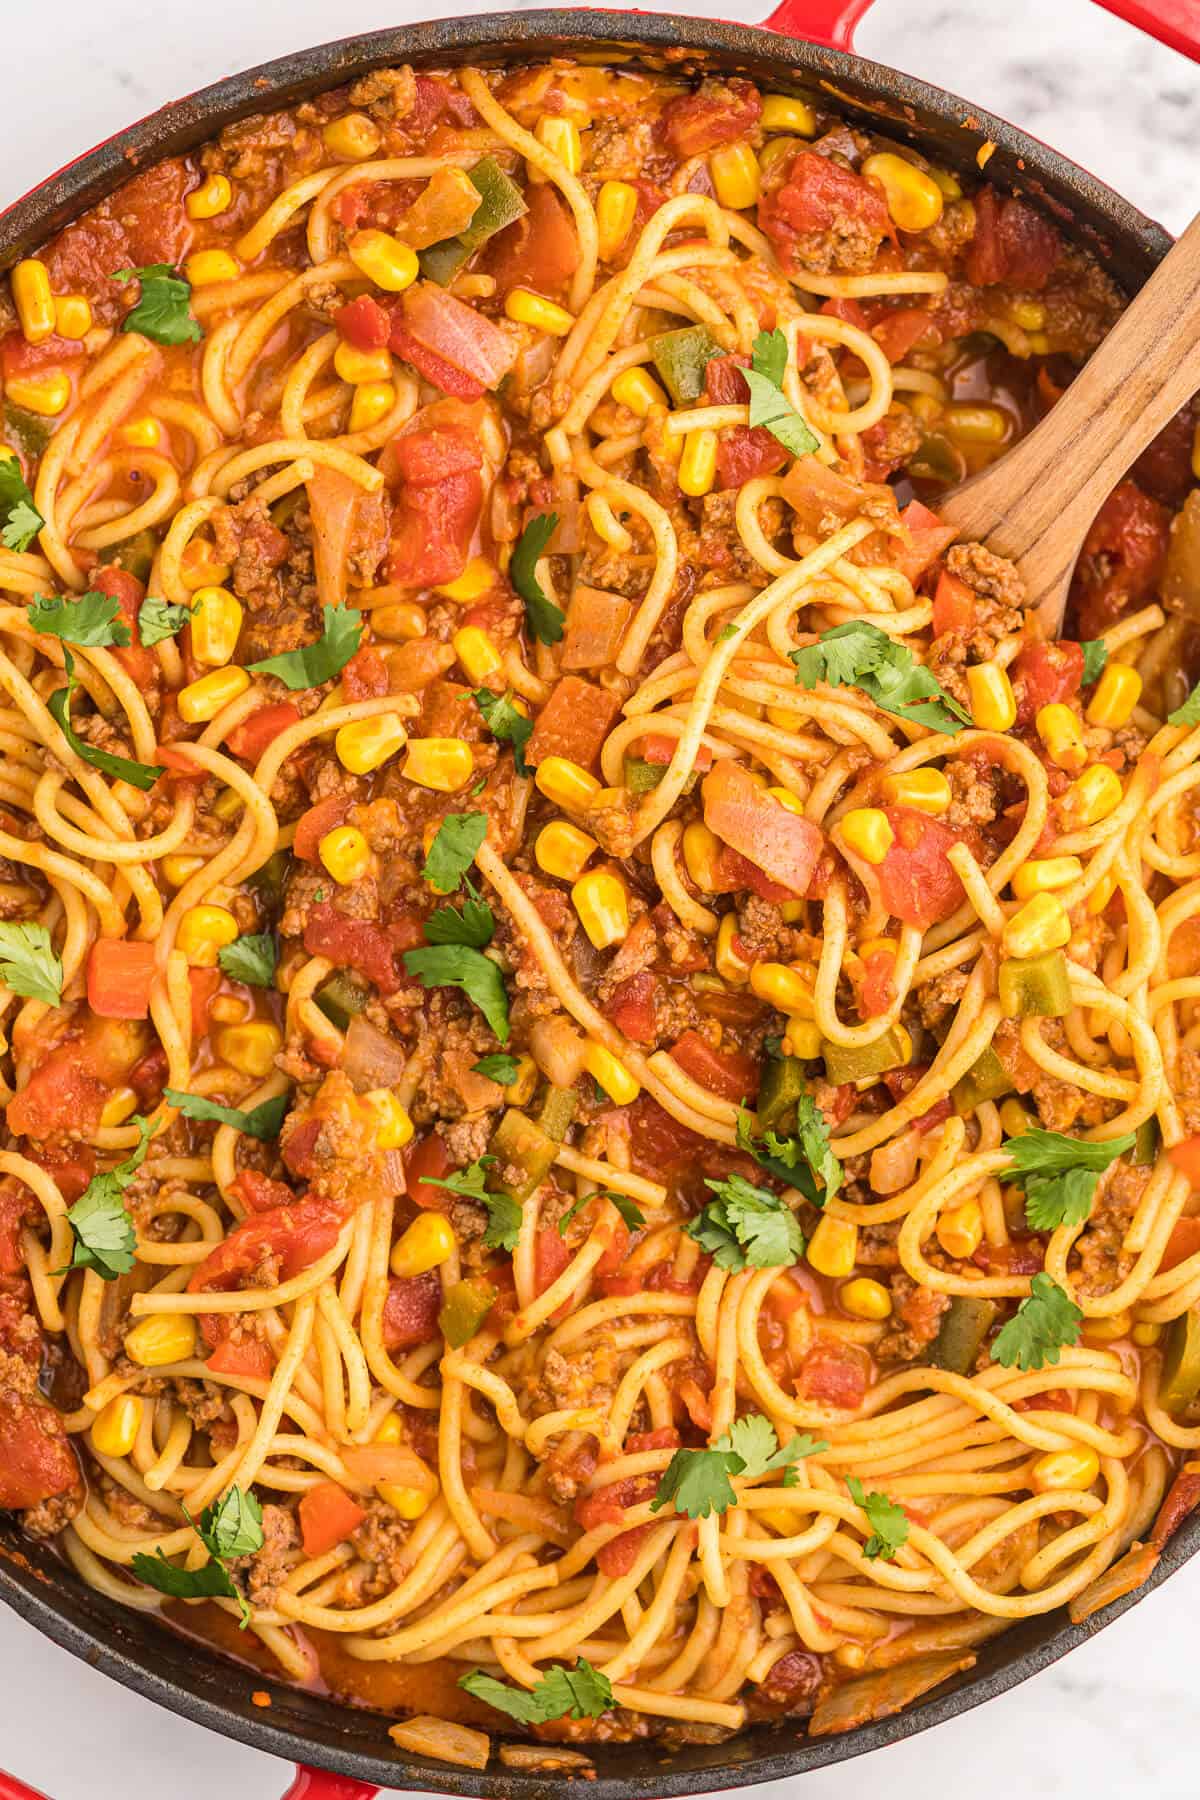 Mexican Spaghetti Recipe - This easy taco pasta recipe is filled with cheesy ground beef, taco seasoning, peppers, corn, tomatoes and noodles. It's simple to make with just the right amount of spice. The perfect family dinner recipe.